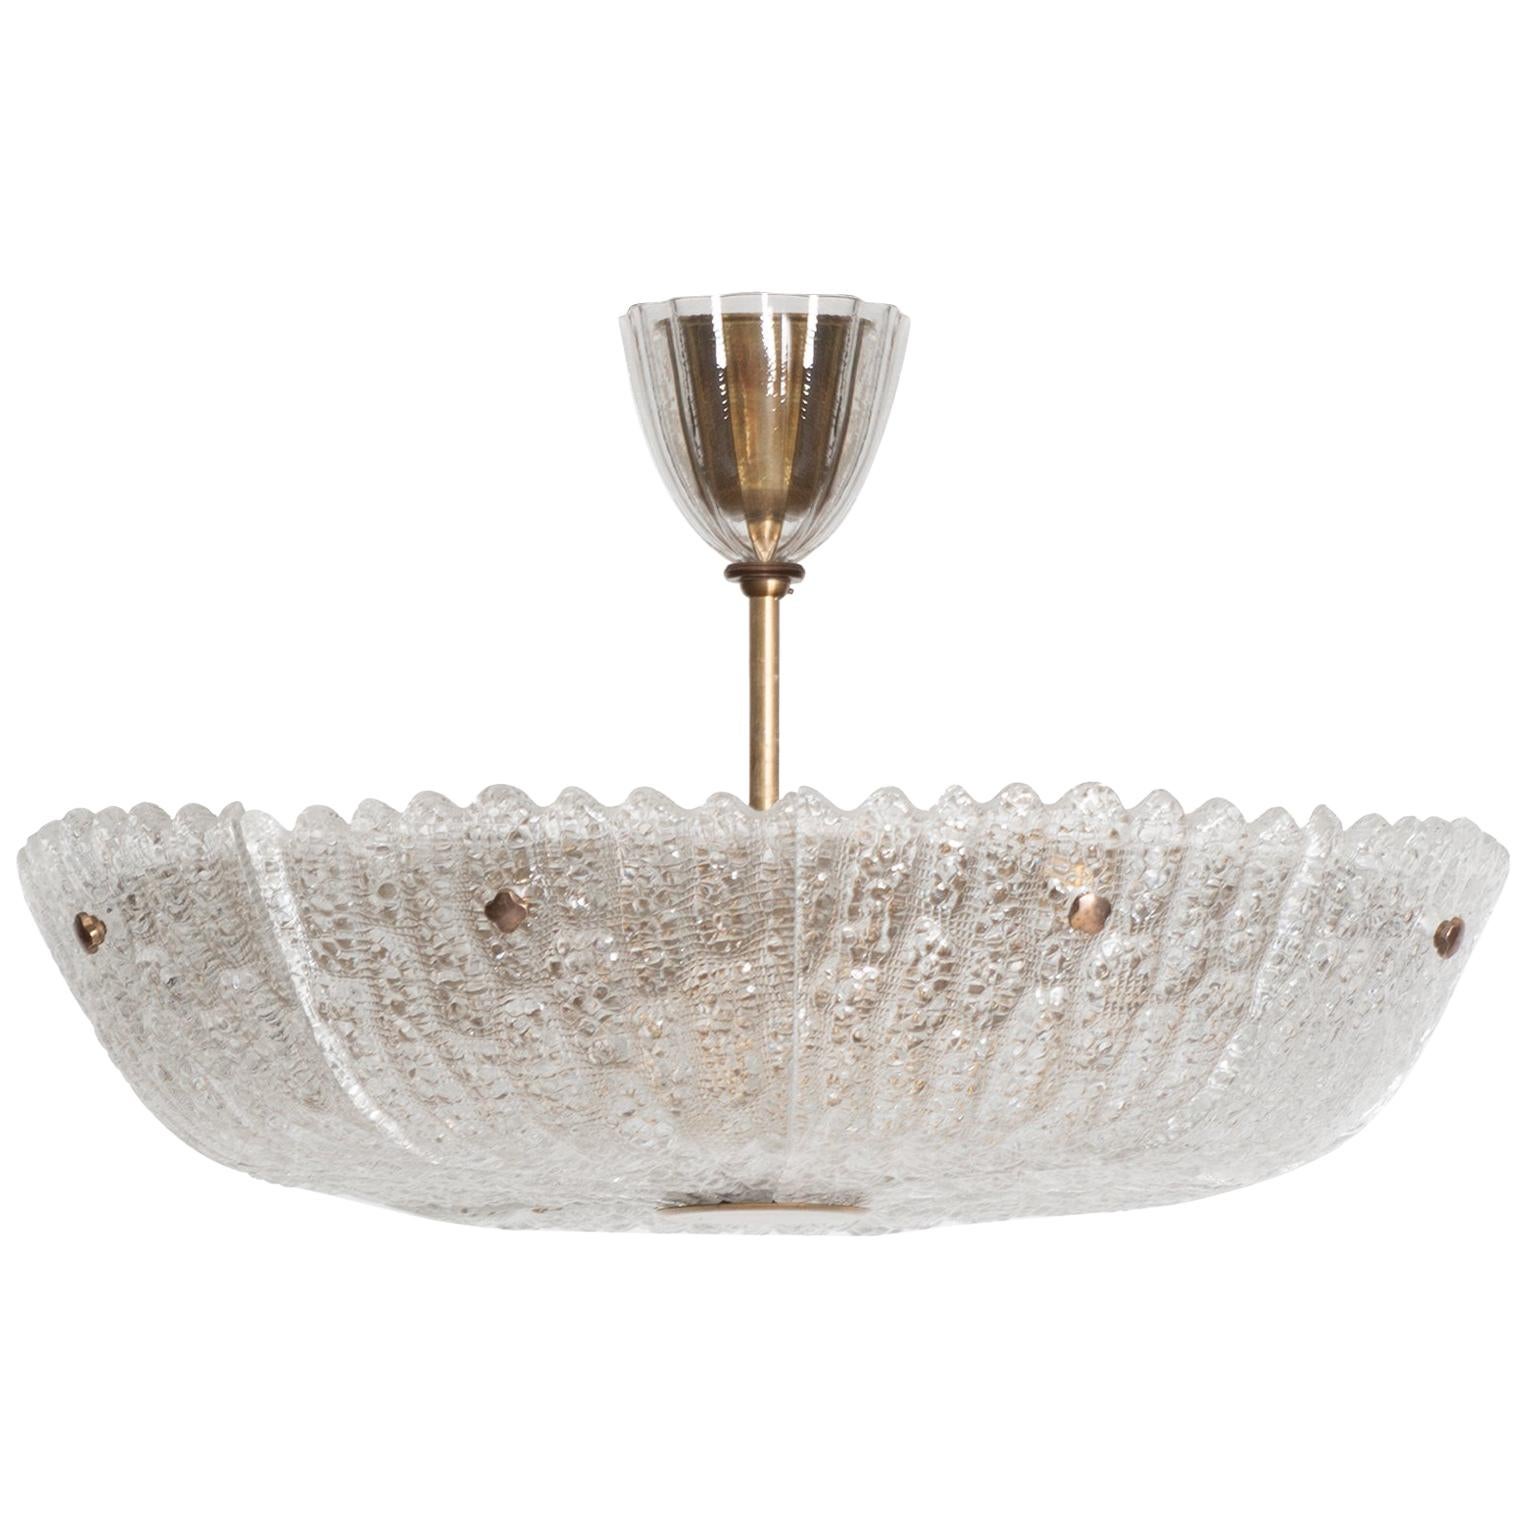 Carl Fagerlund Ceiling Lamp in Glass and Brass Produced by Orrefors in Sweden